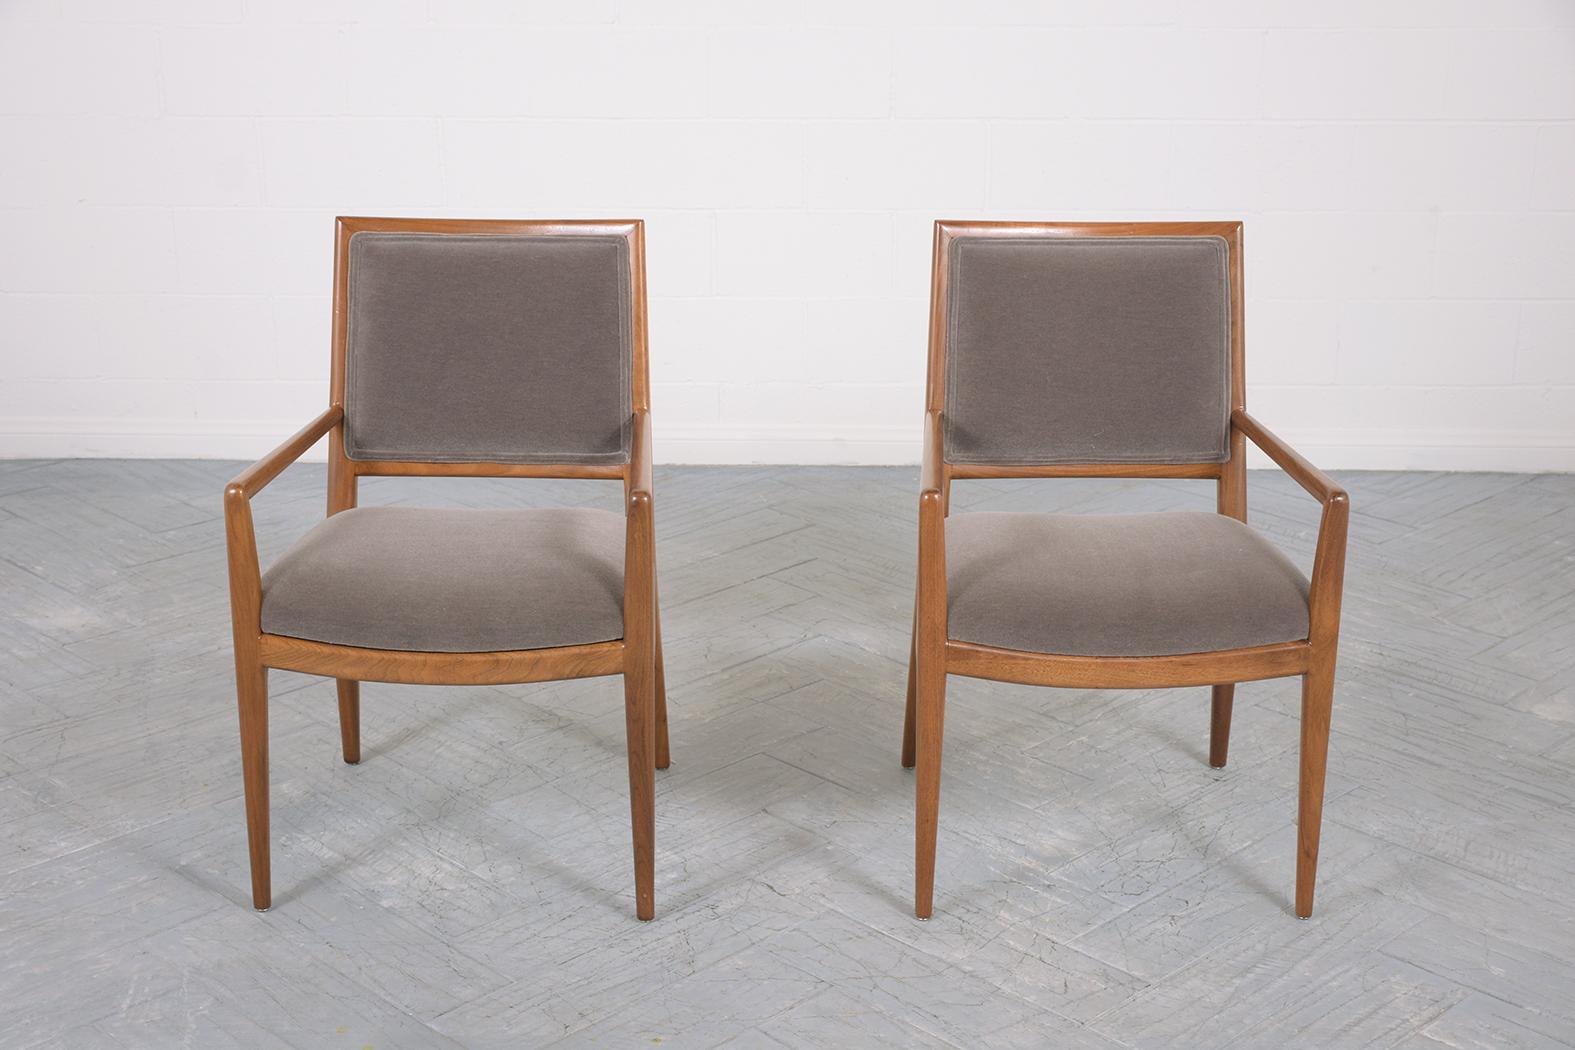 Carved Vintage 1960s Robsjohn Gibbings Style Mid-Century Modern Walnut Armchairs For Sale